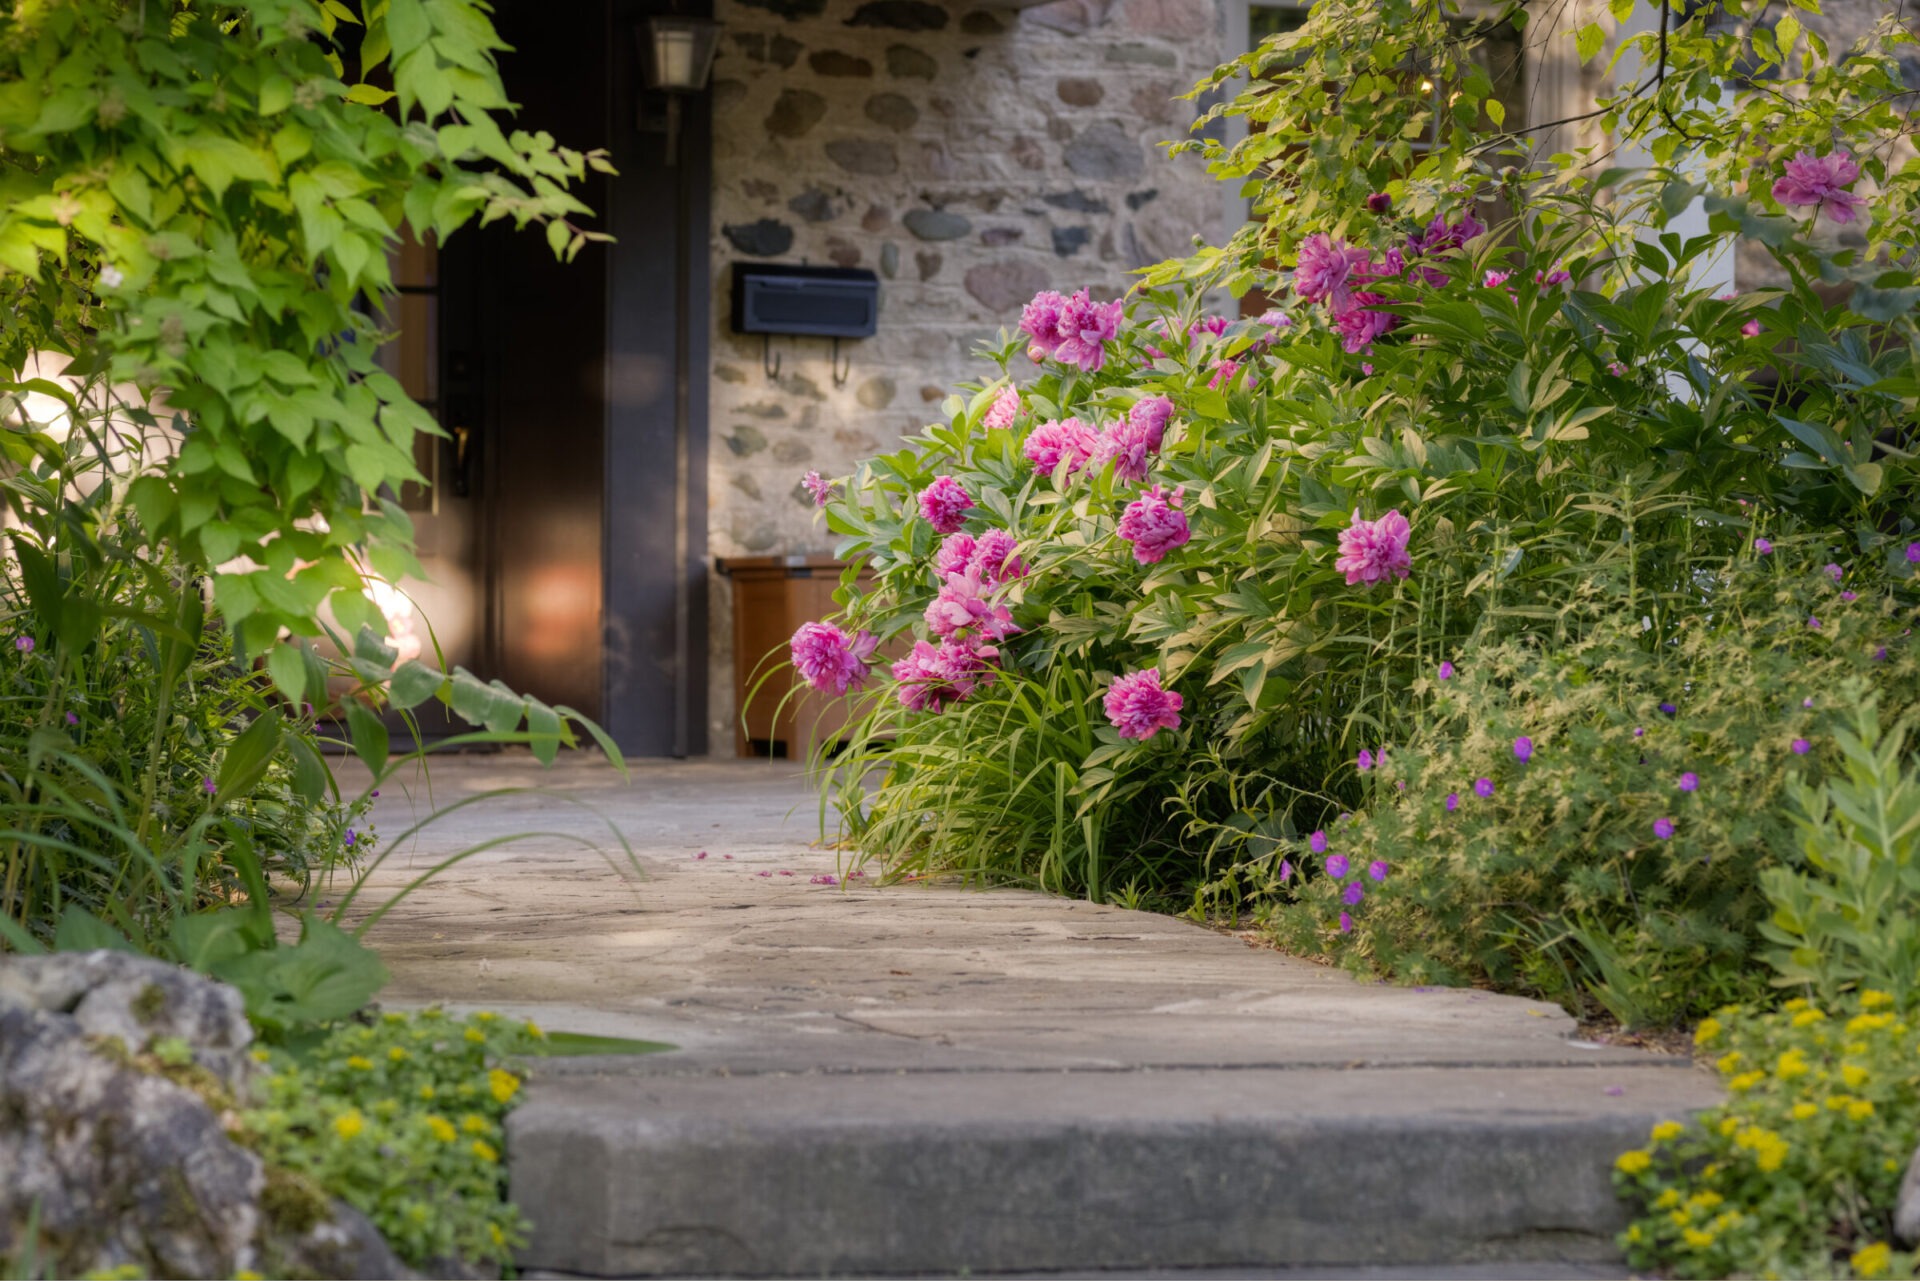 This image shows a picturesque stone path leading to a dark entrance door, flanked by lush pink flowers, green foliage, and a mailbox on the wall.